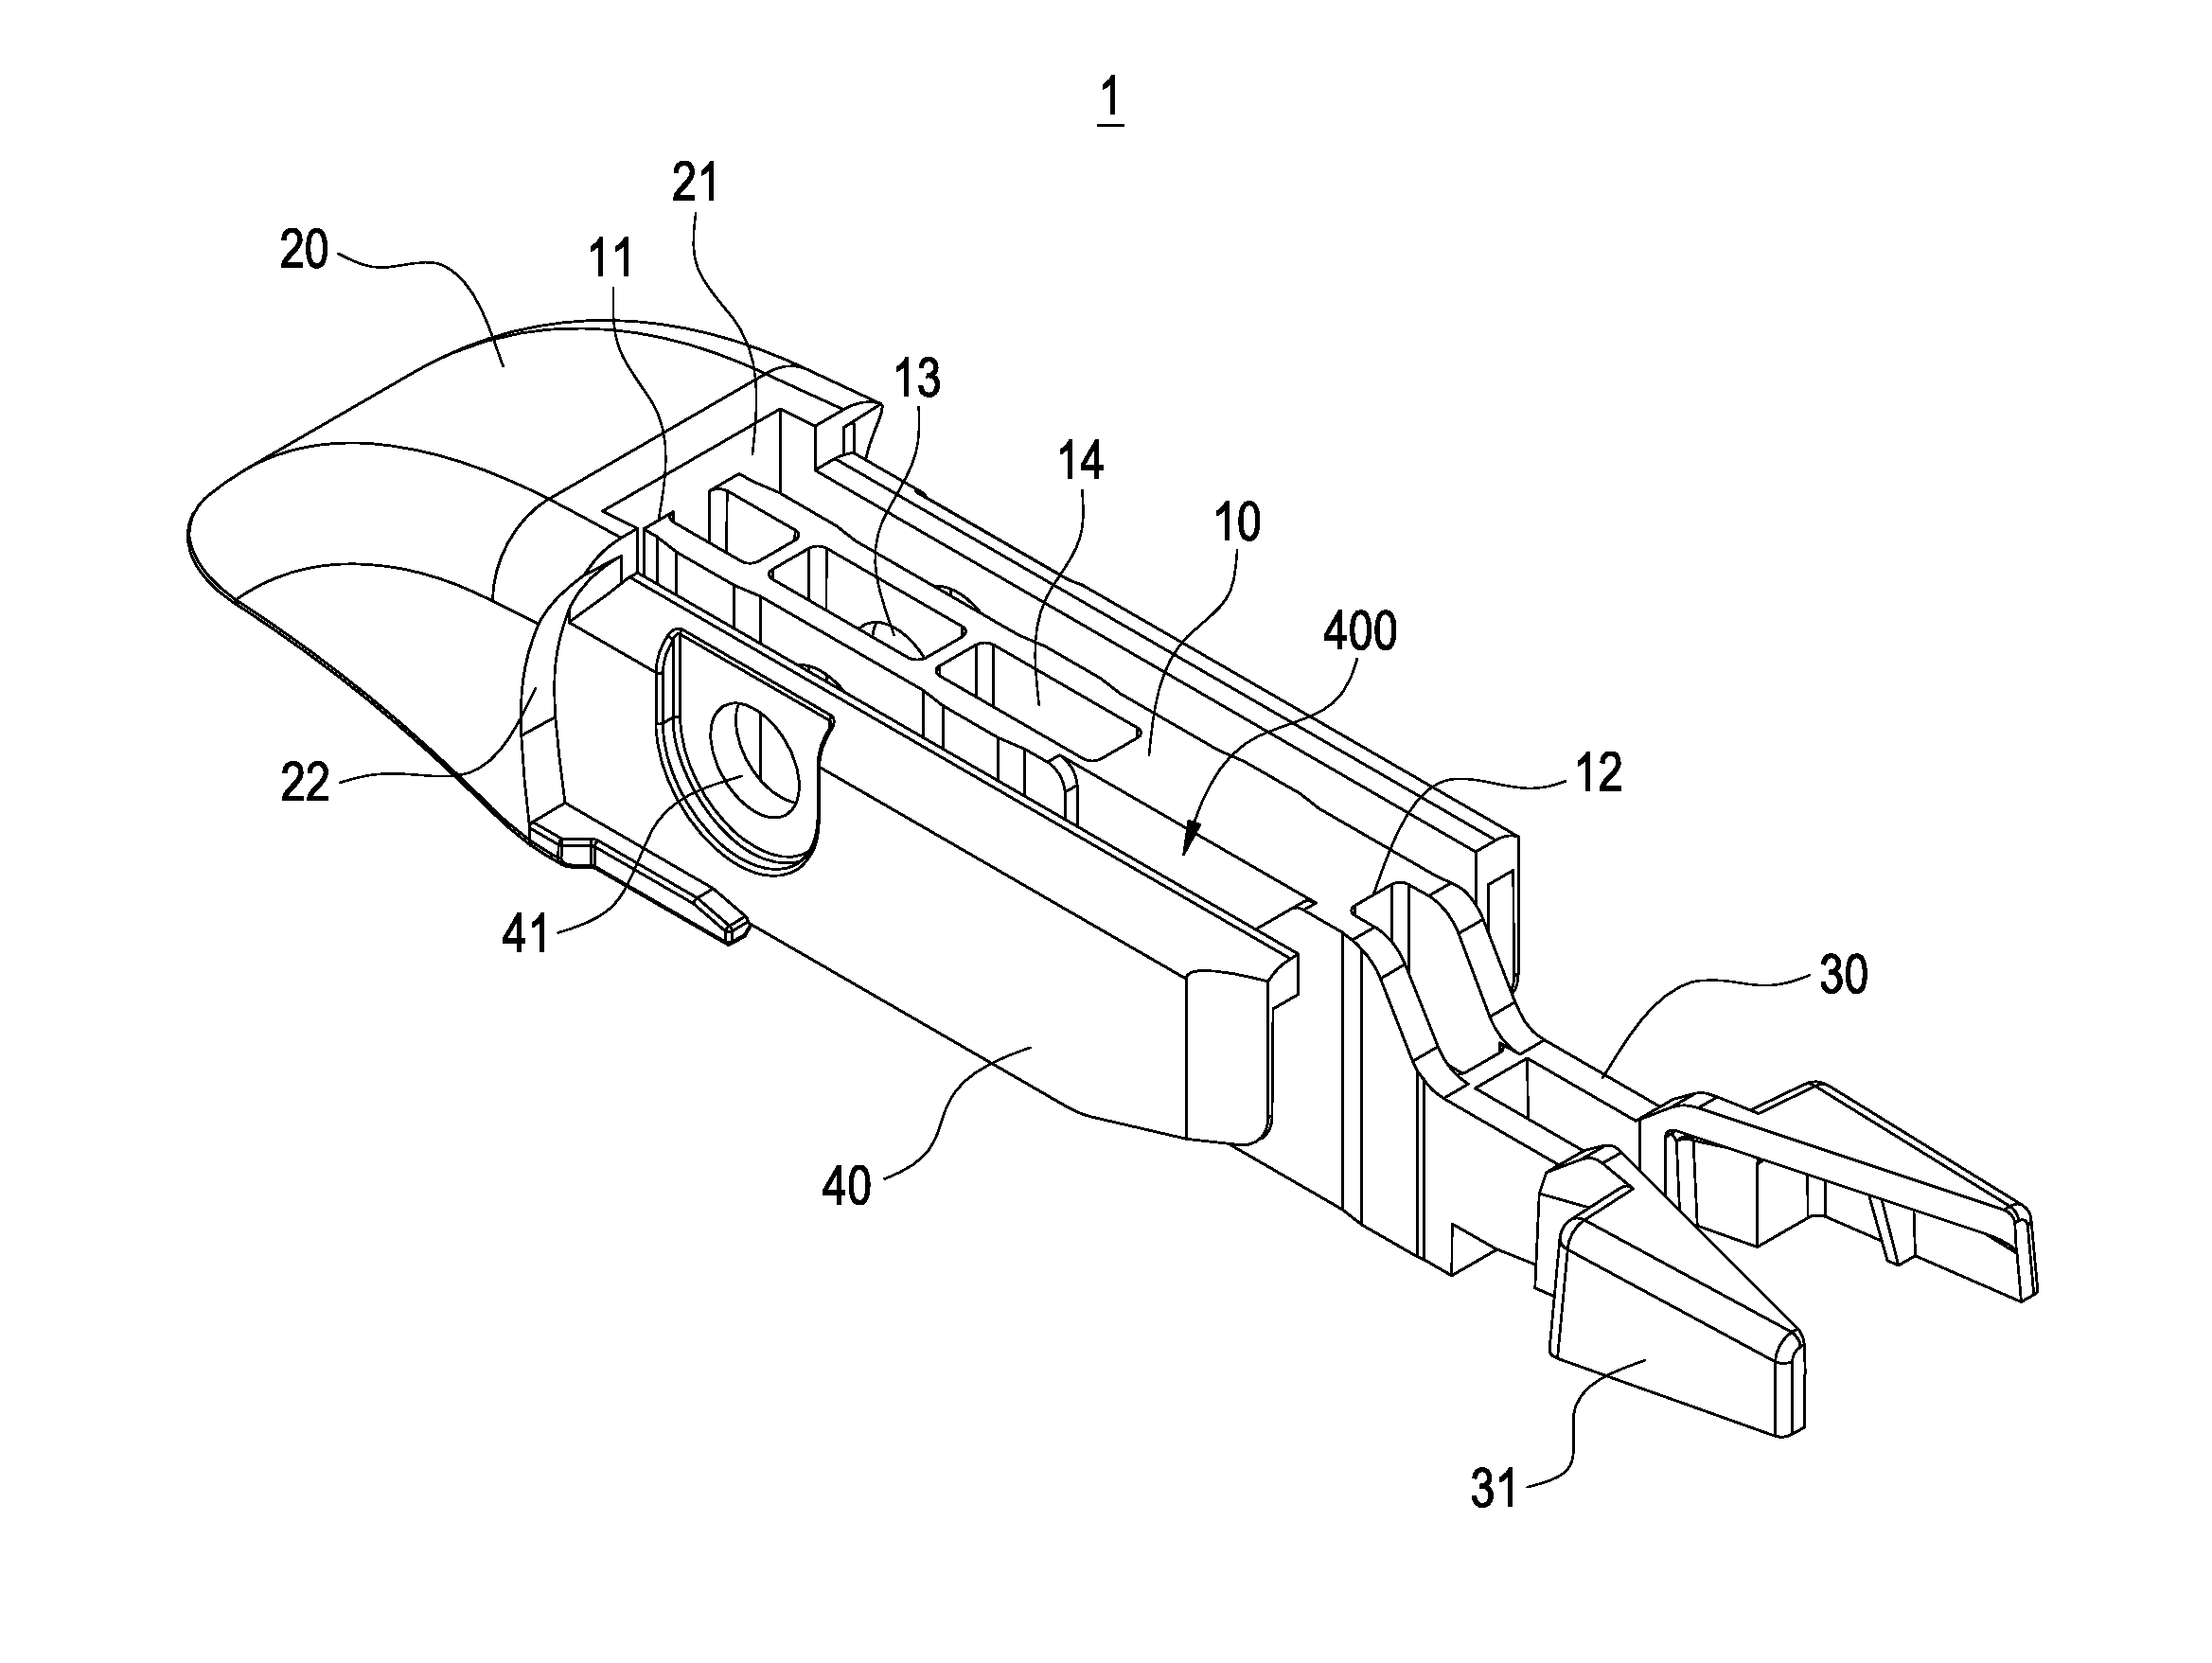 General wiper connecting apparatus